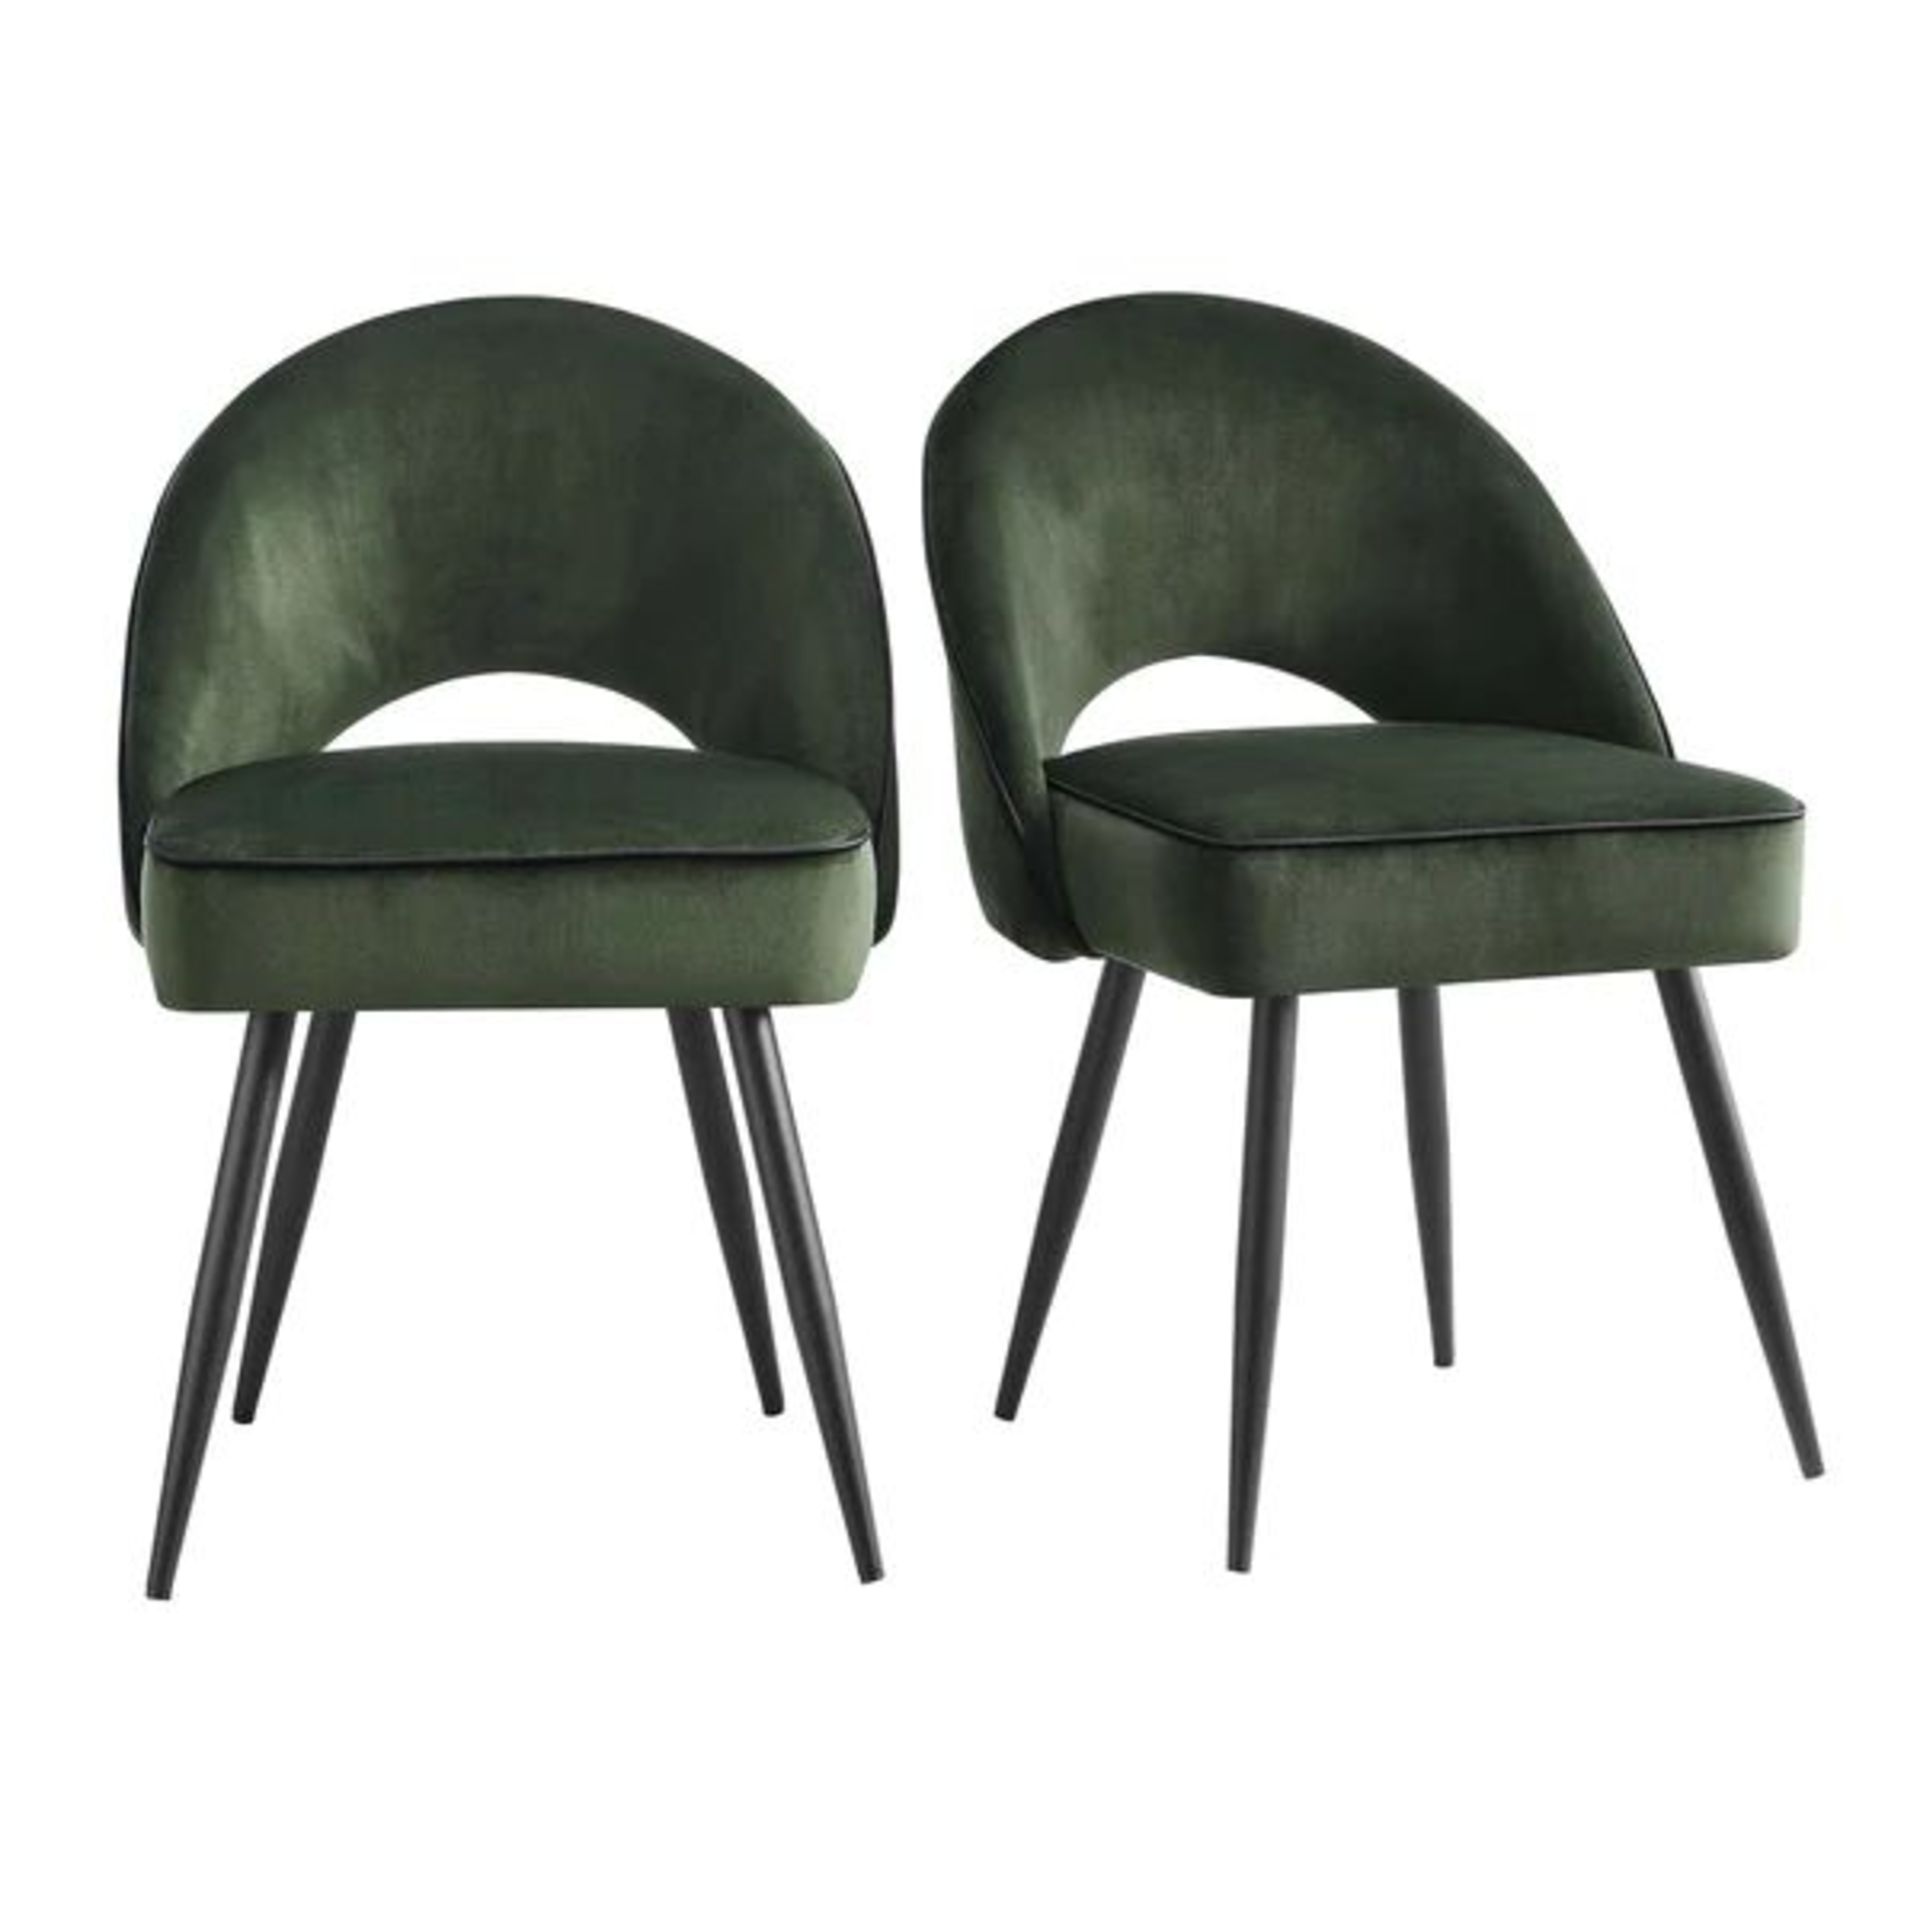 Oakley Set of 2 Dark Green Velvet Upholstered Dining Chairs with Contrast Piping. - R14. RRP £259. - Bild 2 aus 2